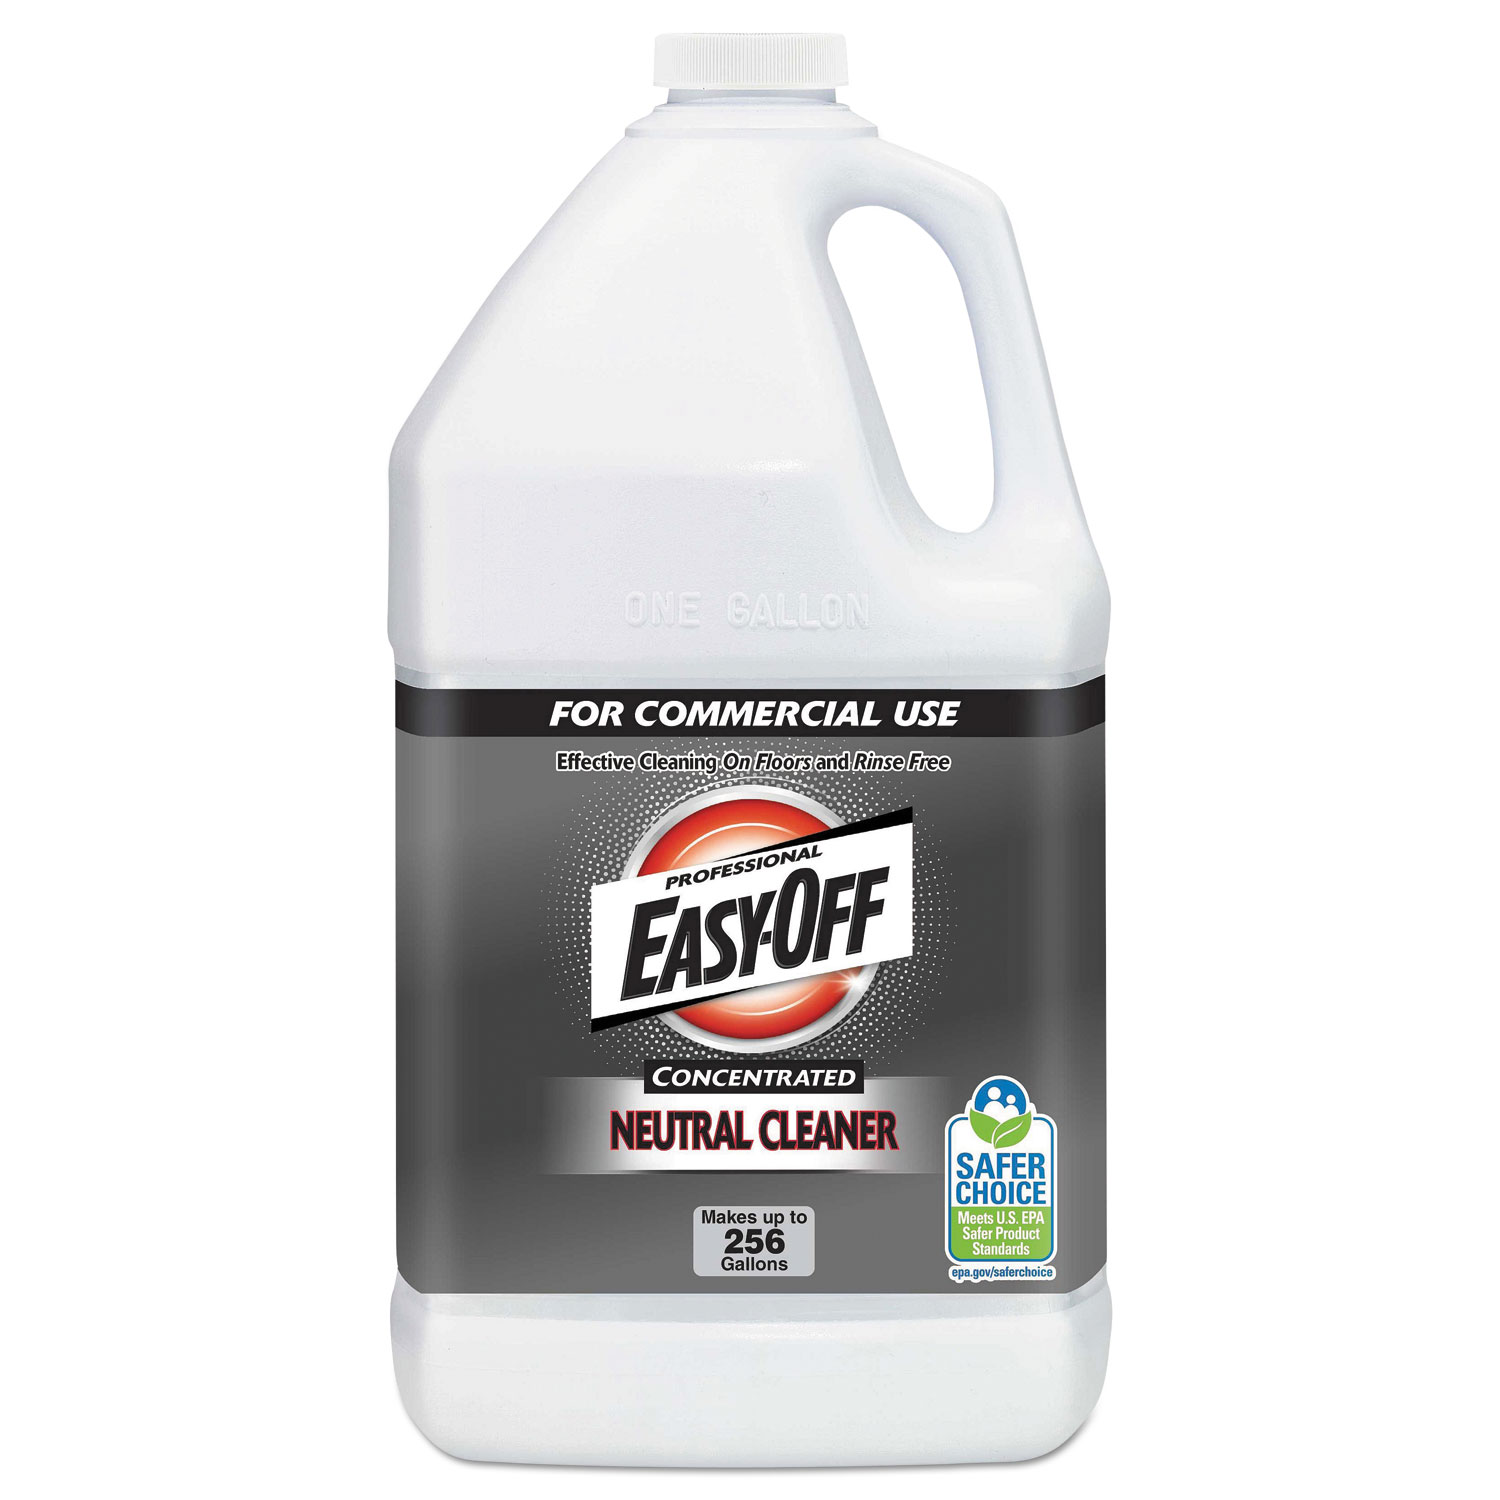  Professional EASY-OFF 36241-89770 Concentrated Neutral Cleaner, 1 gal bottle (RAC89770EA) 